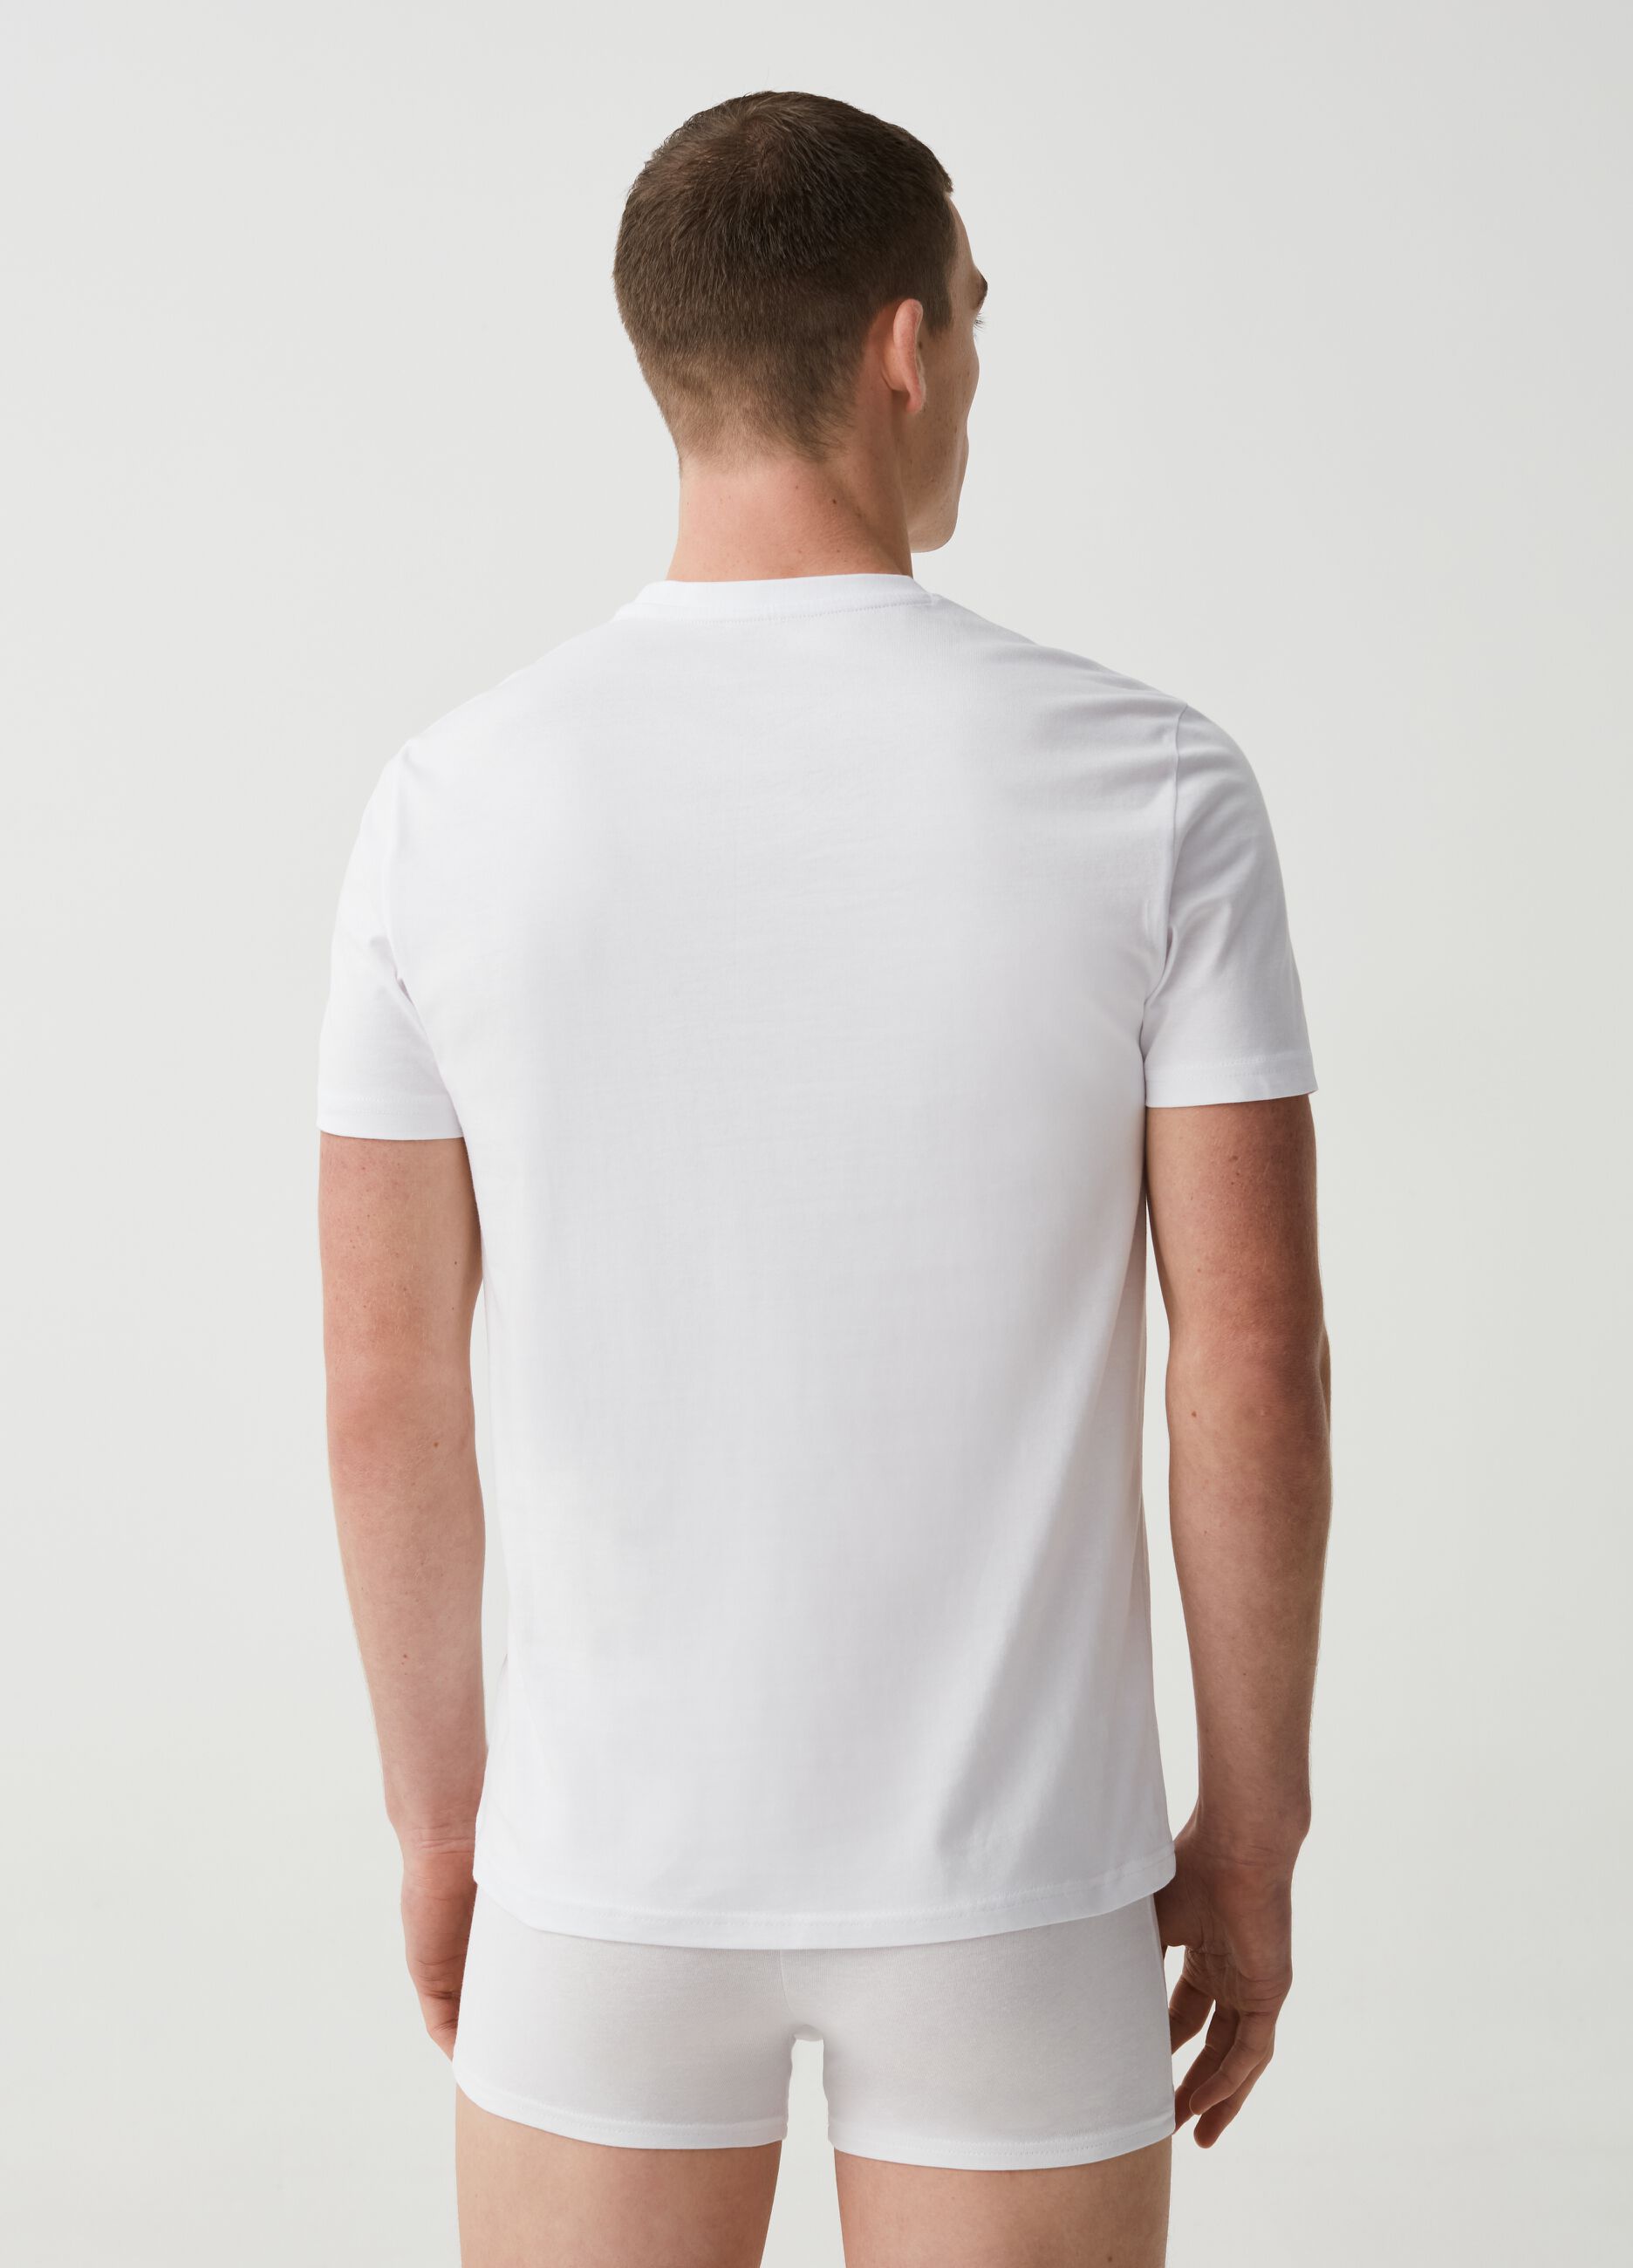 Bipack t-shirt intime termiche in cotone